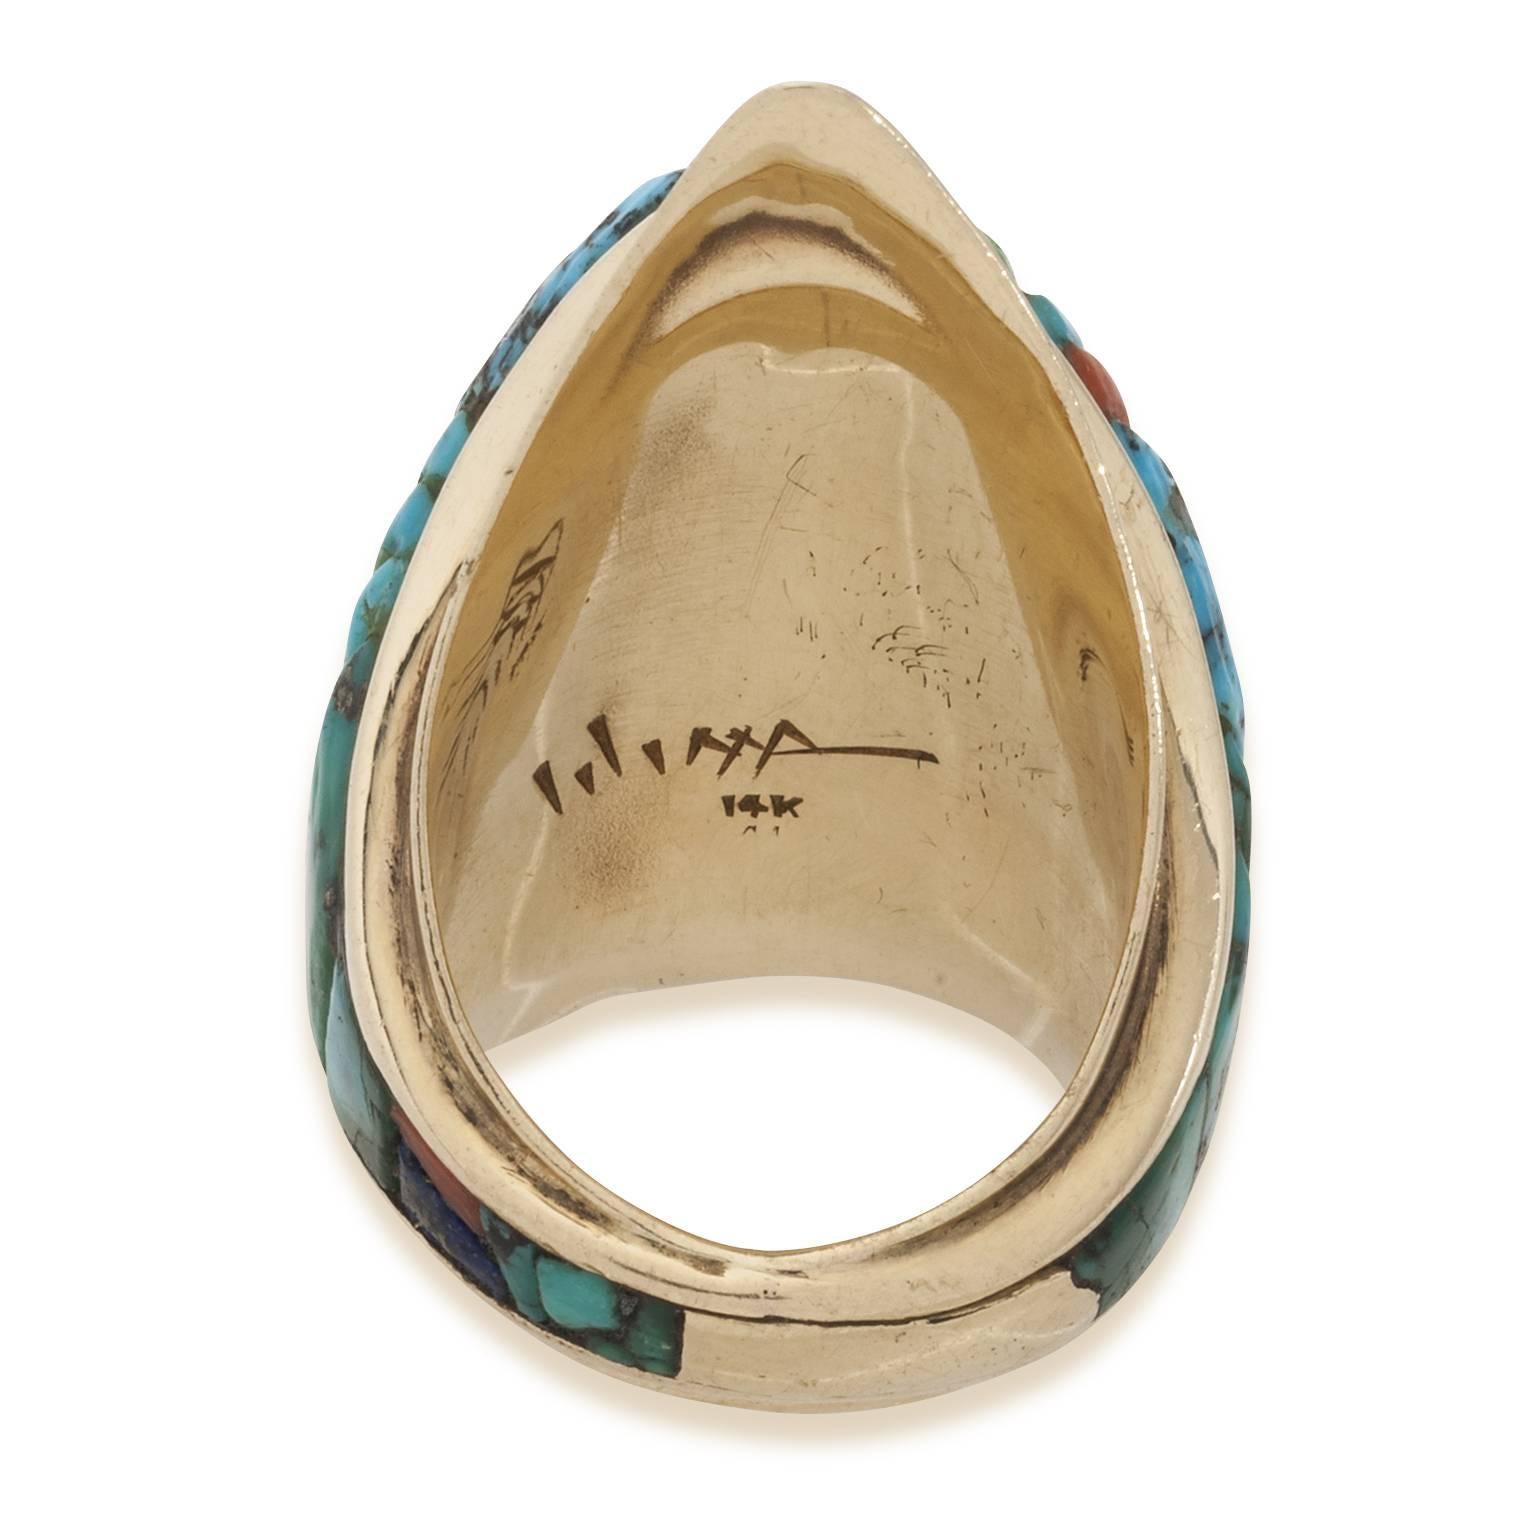 This Charles Loloma ring is intricately inlaid with turquoise, coral and lapis.Set in 14K gold it is an exceptional example of his work. Hopi Indian and a well known craftsmen he is world famous and his style is easily recognizable.The ring size is